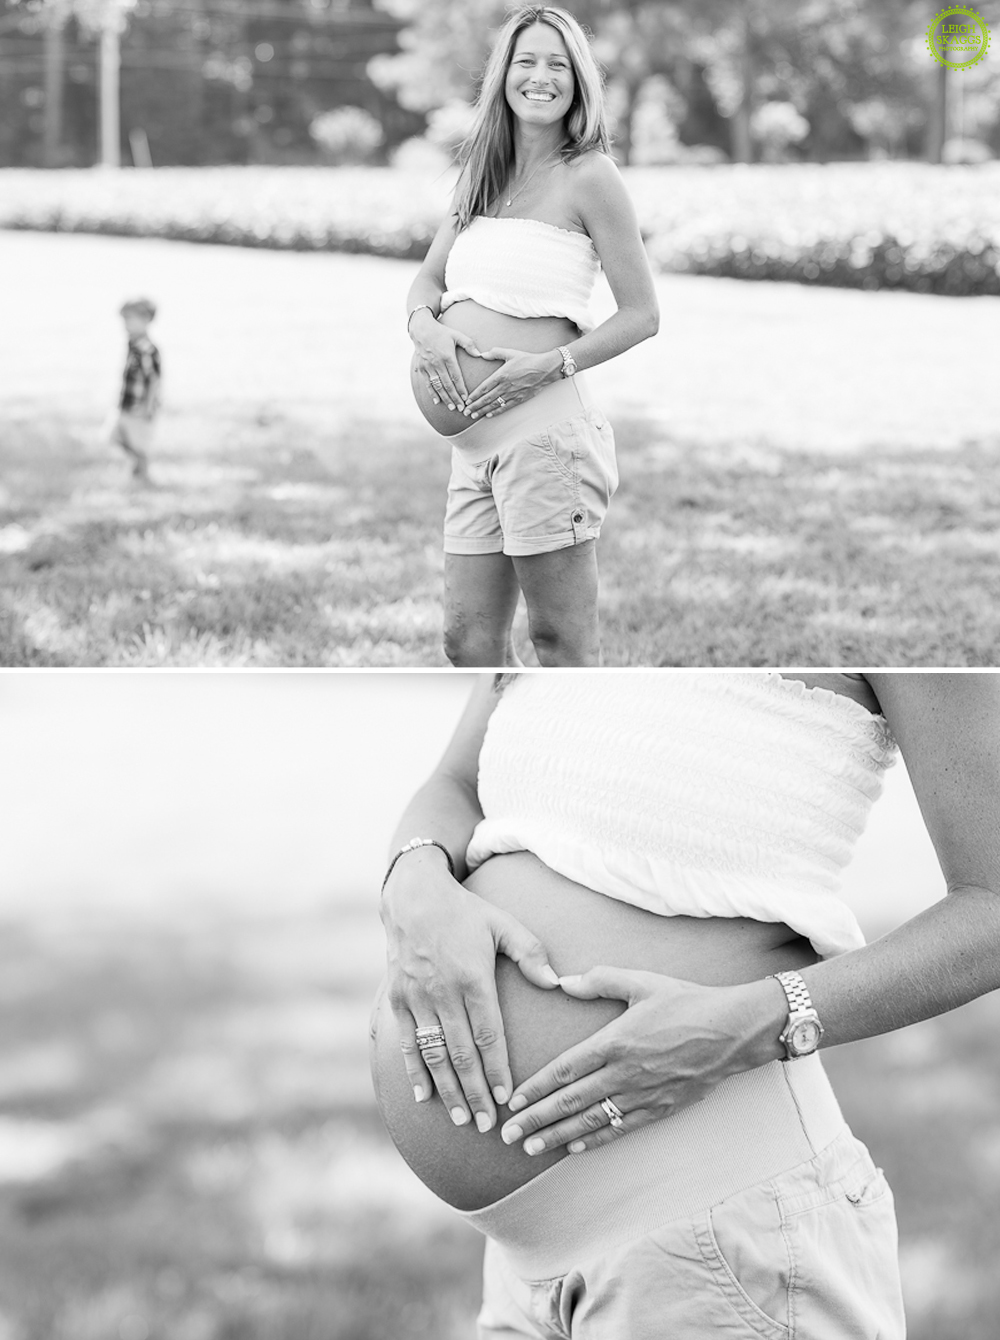 Pungo Virginia Maternity and Family LifeStyle Portrait Photographer ~The Davis Family is Having a Baby~